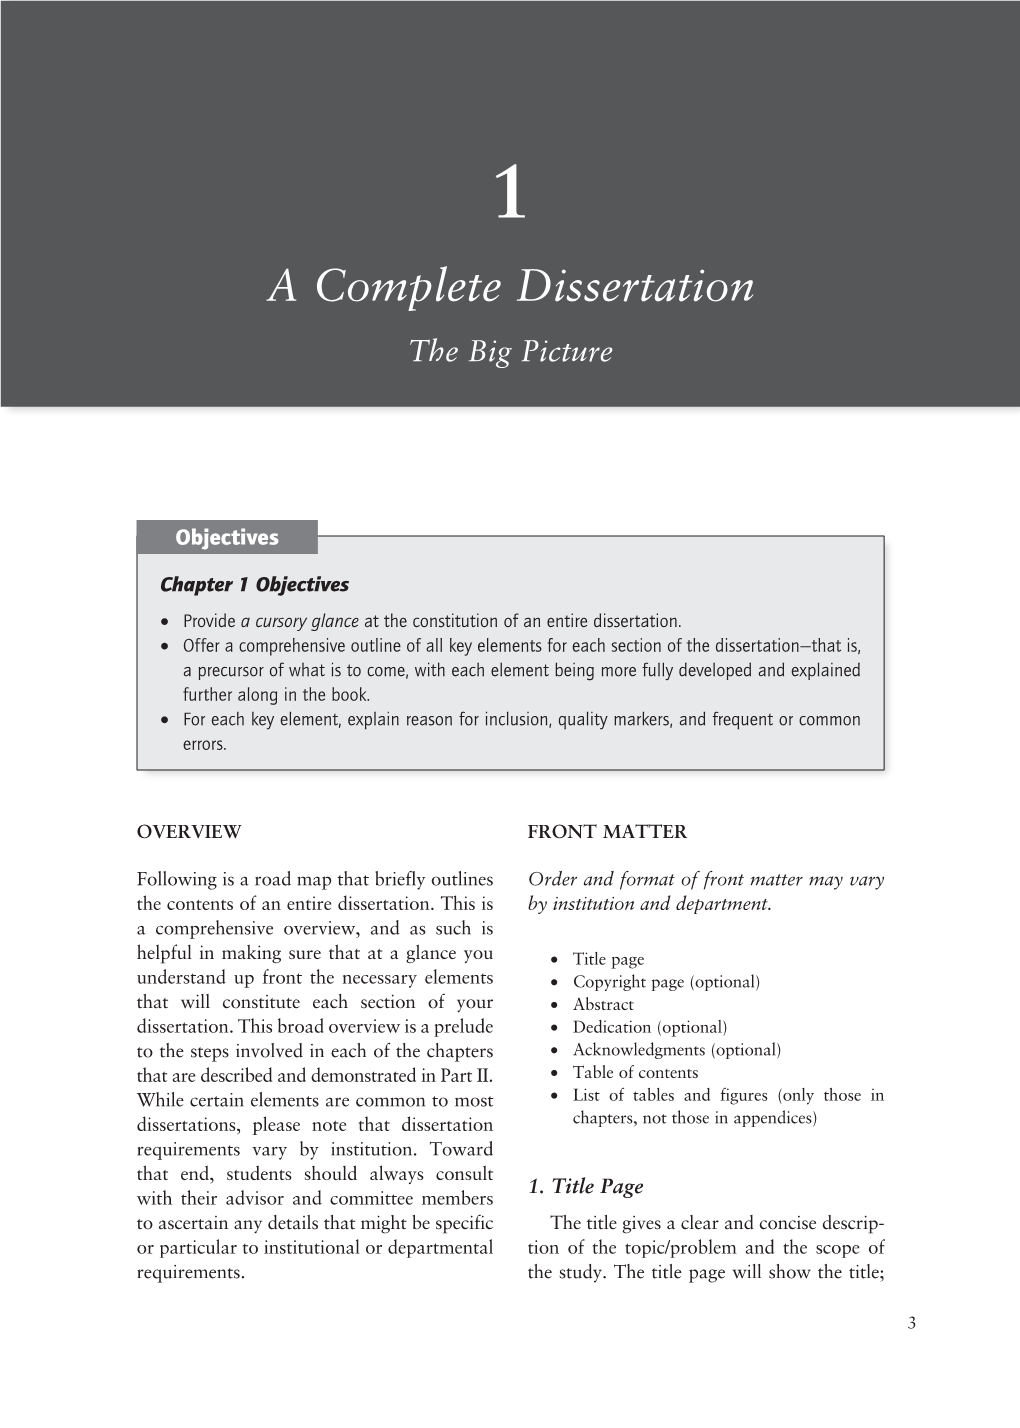 A Complete Dissertation the Big Picture